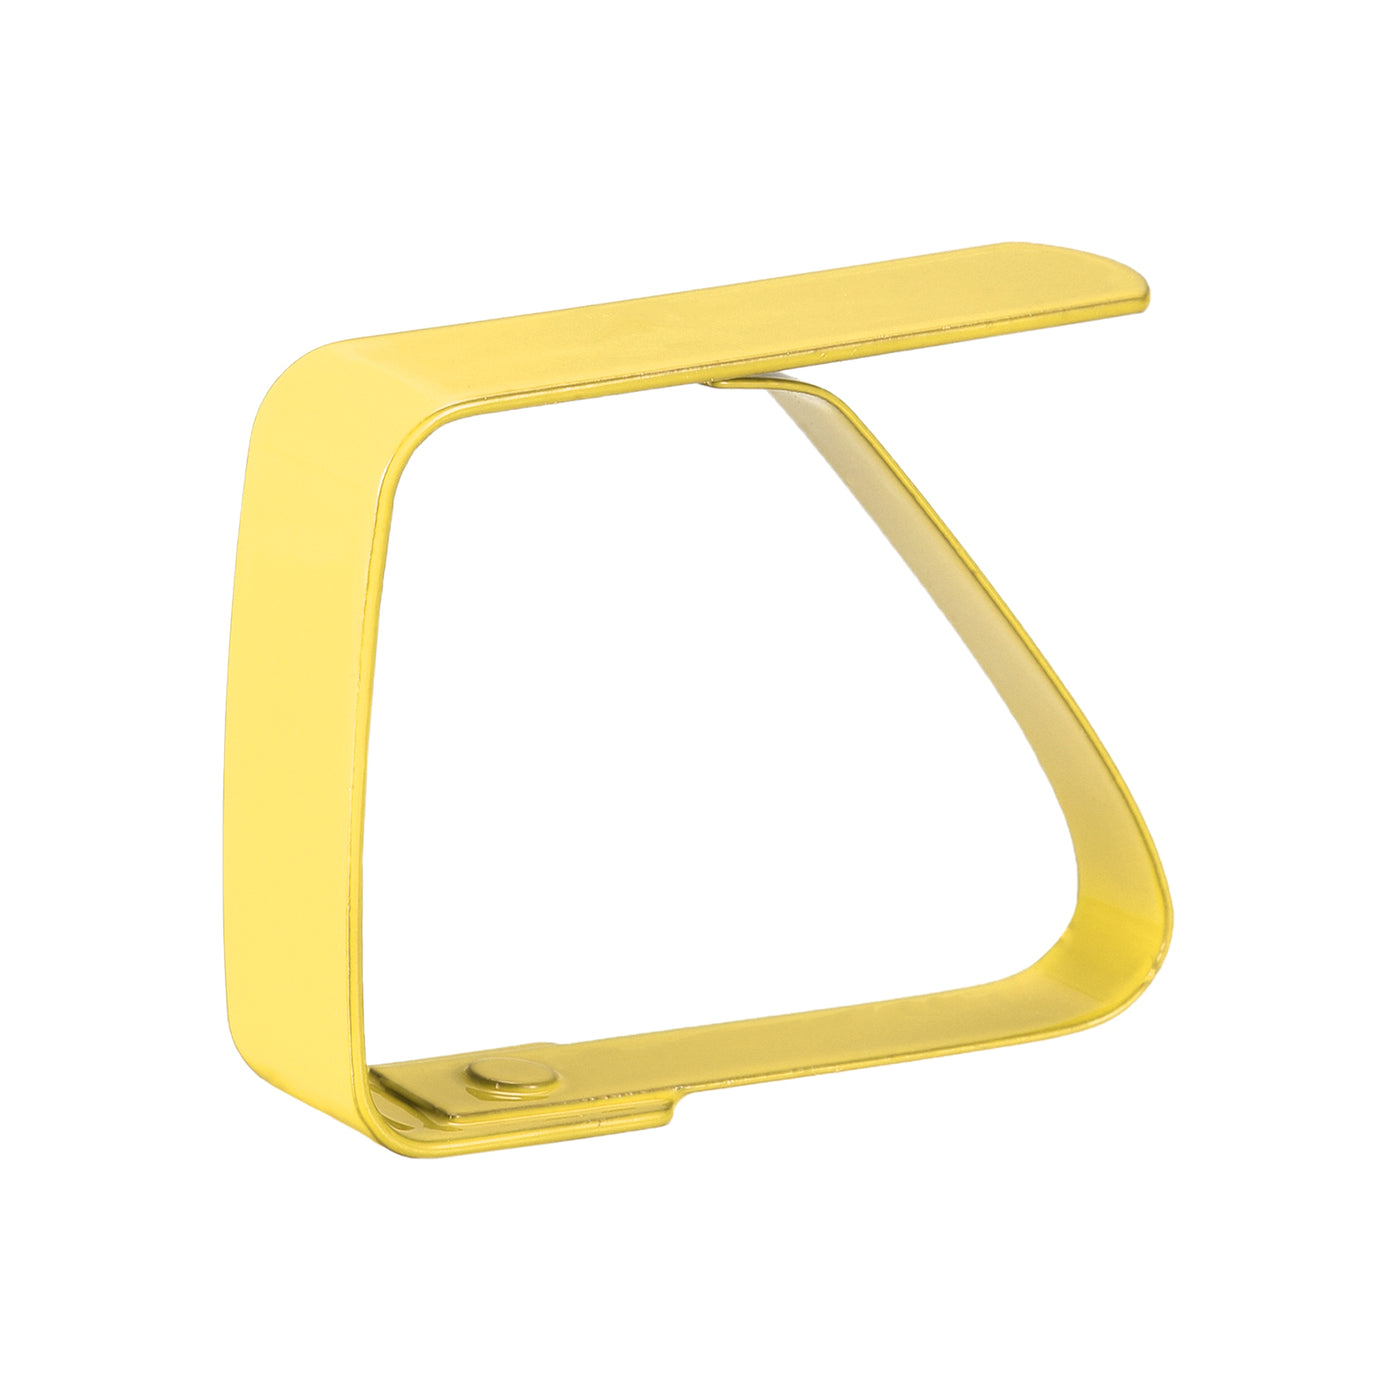 uxcell Uxcell Tablecloth Clips 50mm x 40mm 420 Stainless Steel Table Cloth Holder Yellow 12Pcs